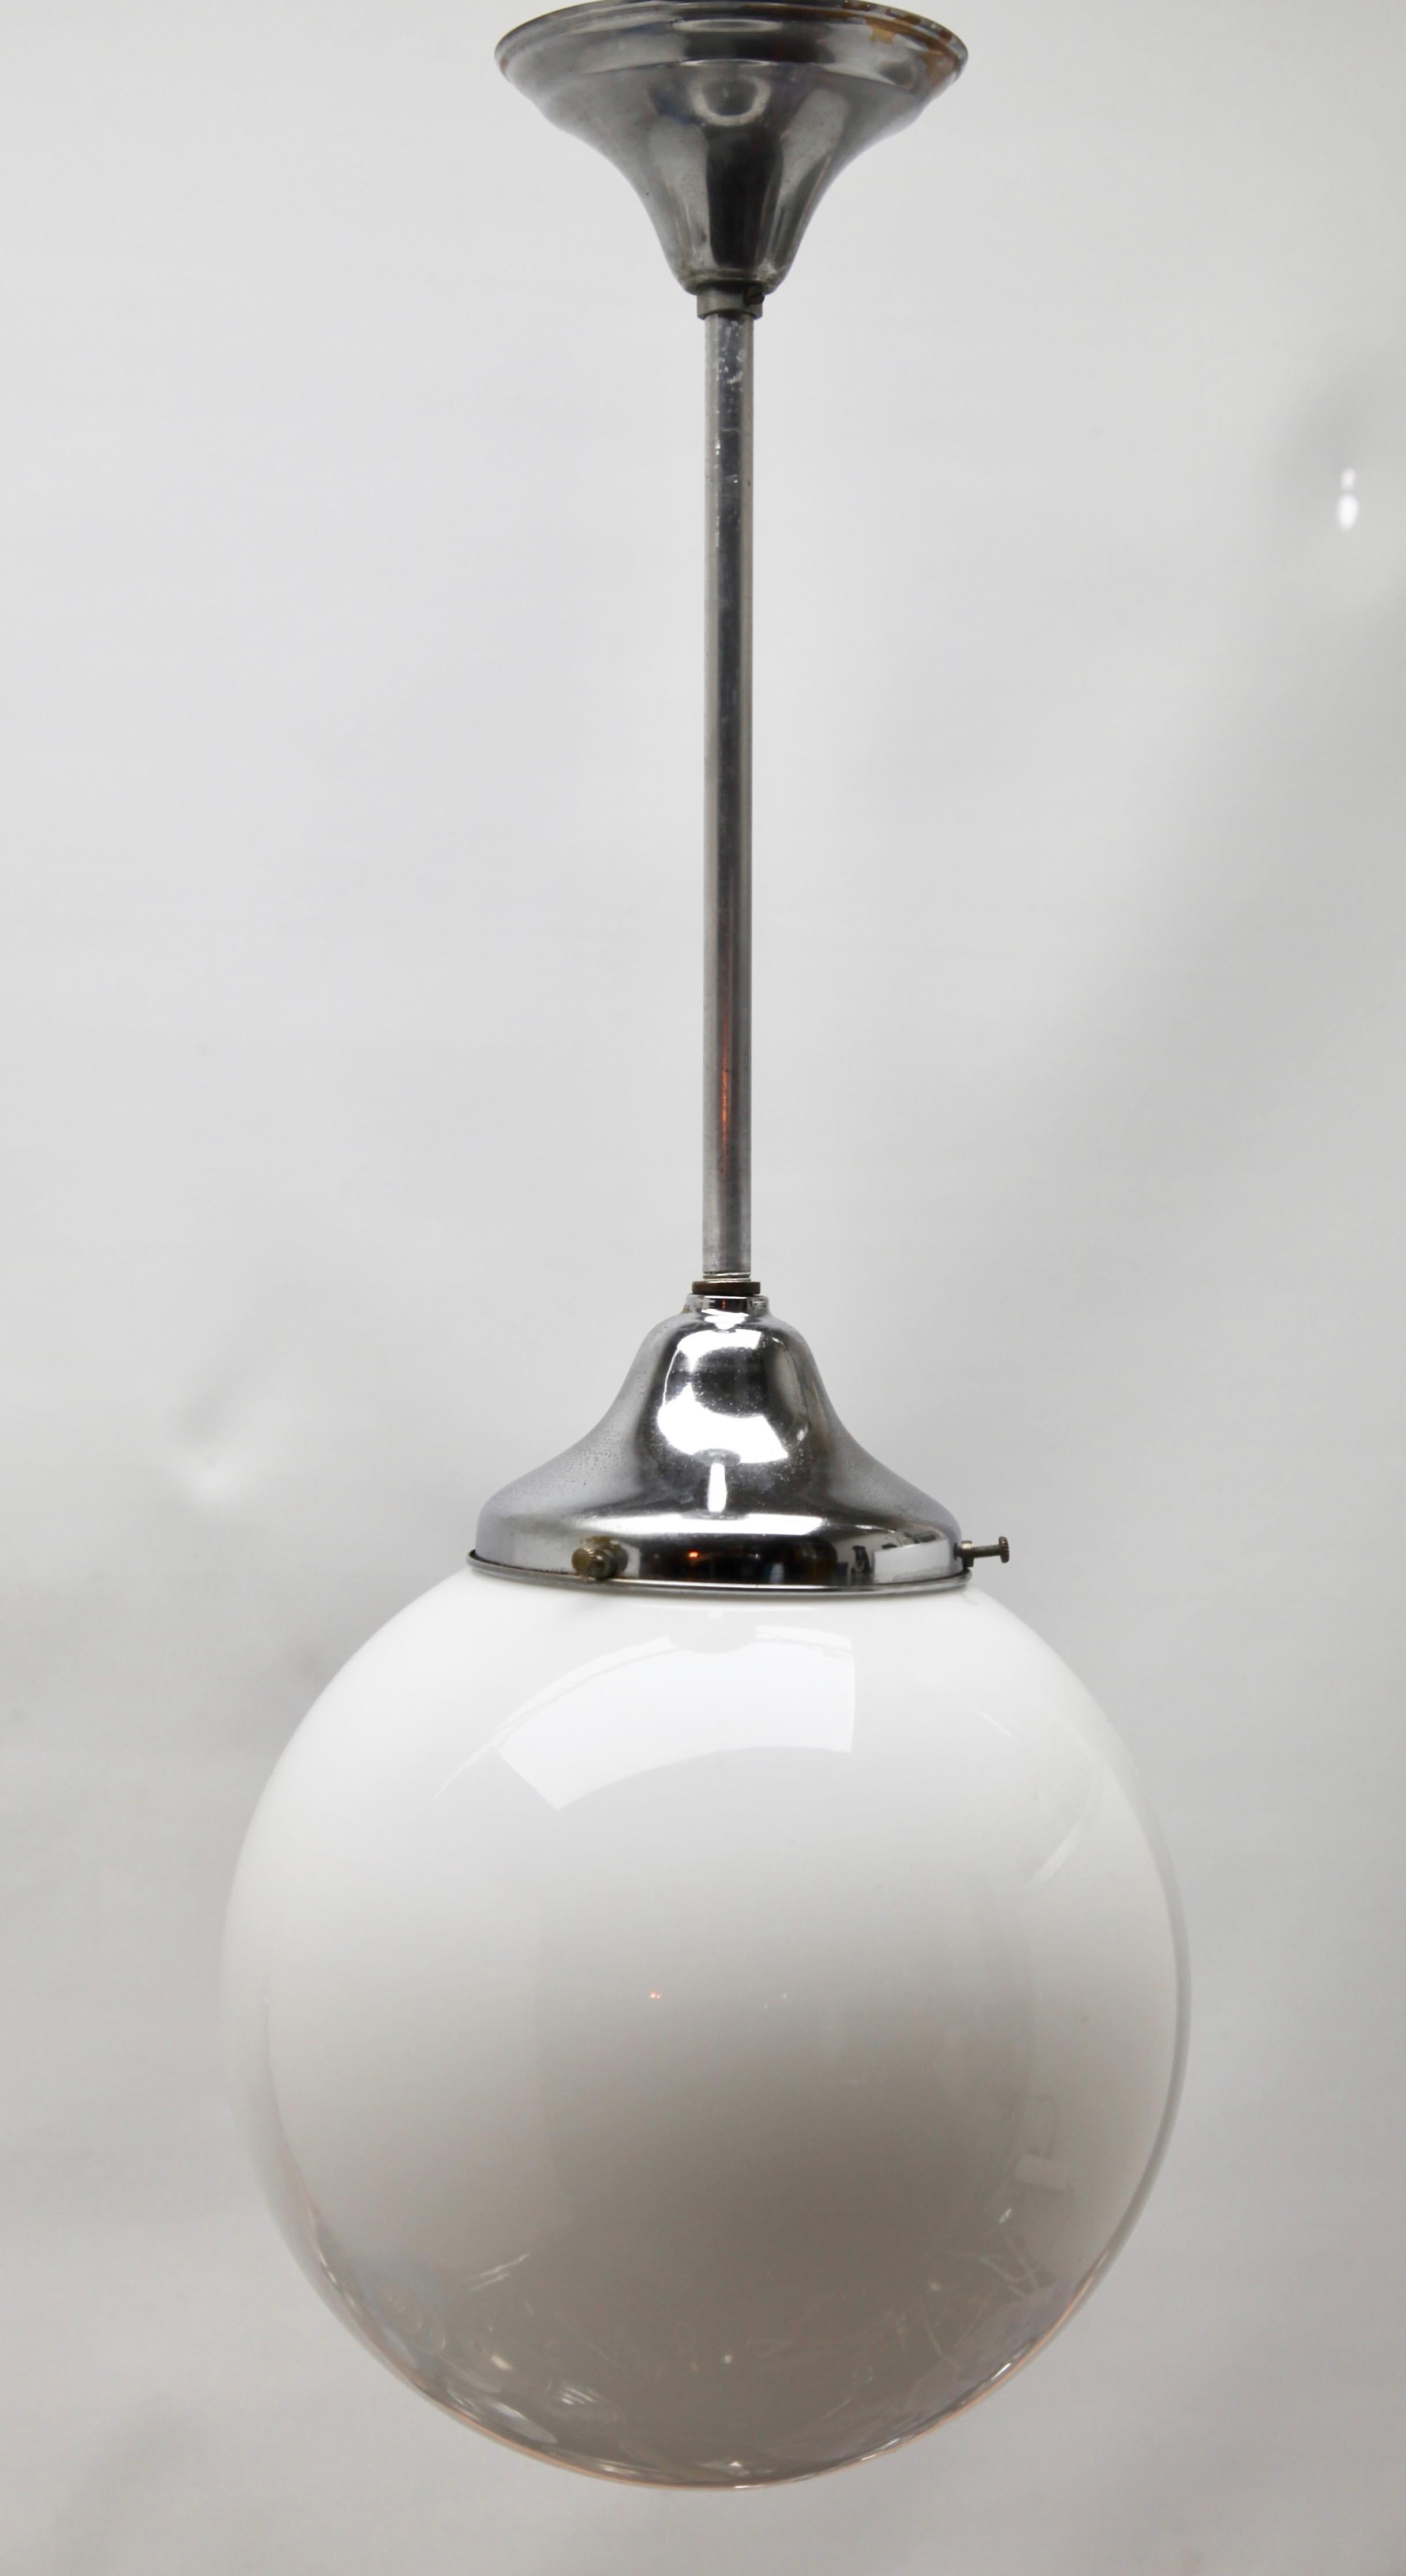 Phillips Pendant Stem Lamp with a Globular Opaline Shade, 1930s, Netherlands For Sale 1